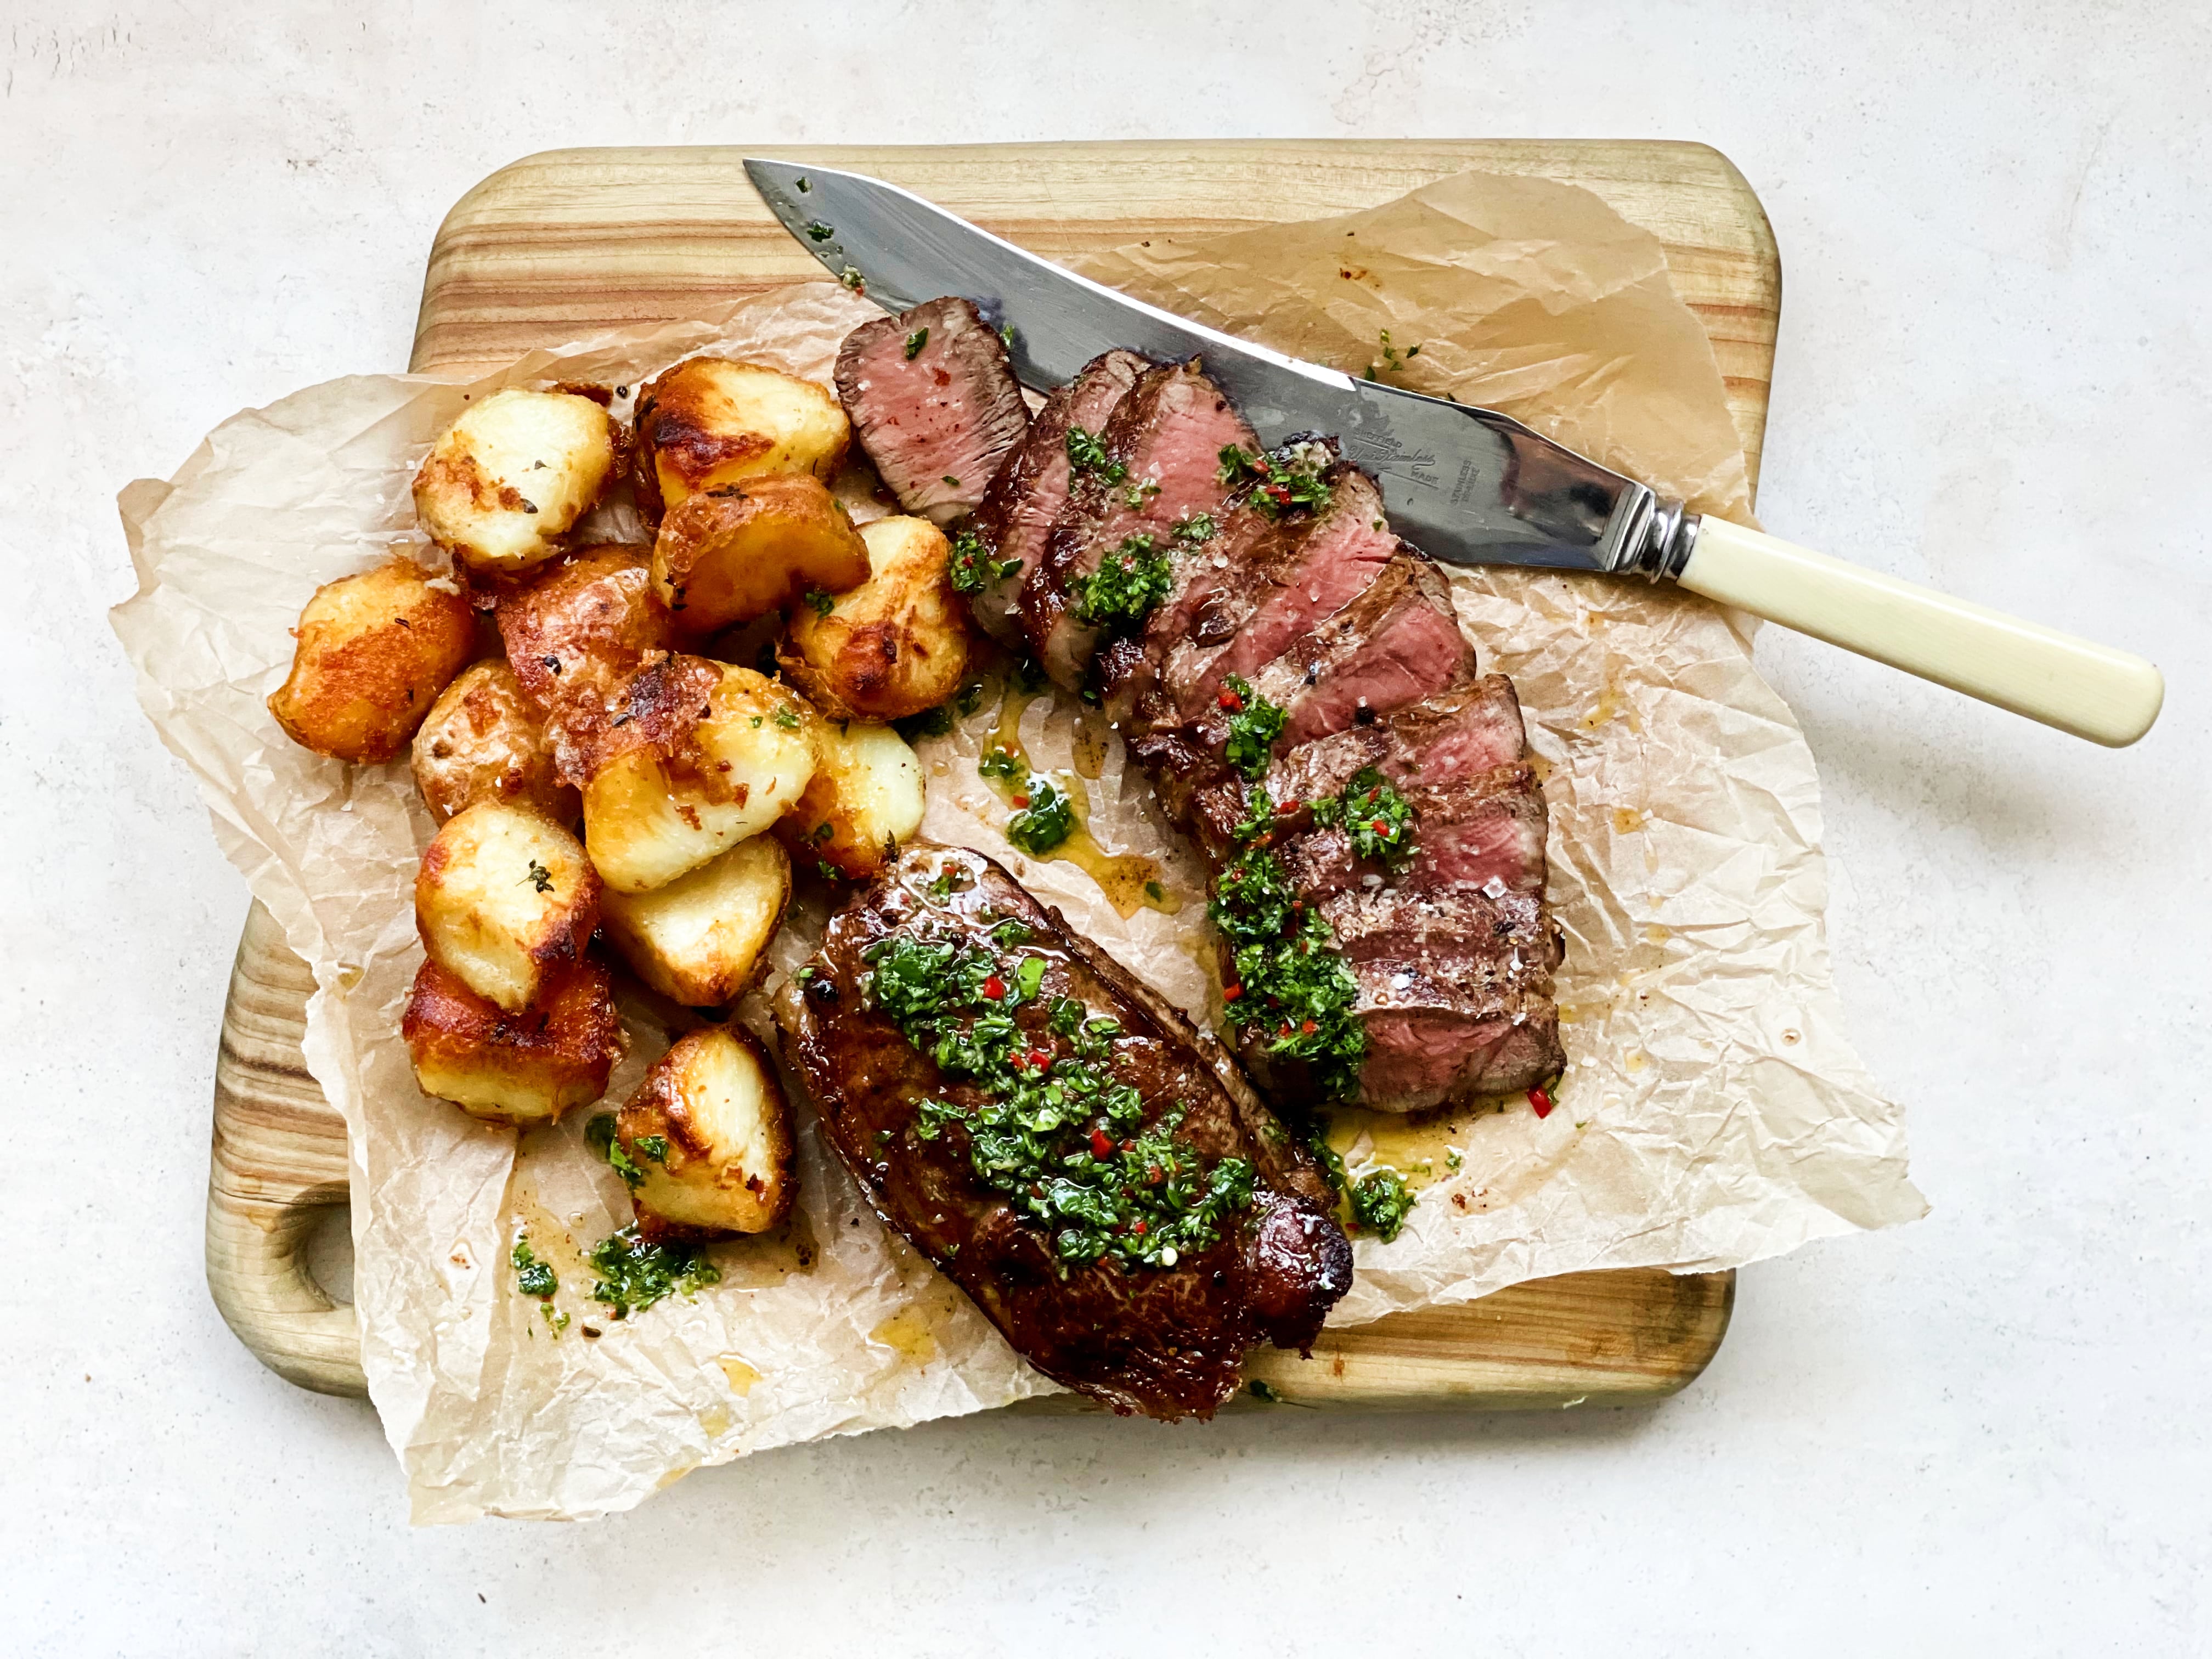 Roasted potatoes with roasted sliced scotch fillet steak topped with chimichurri